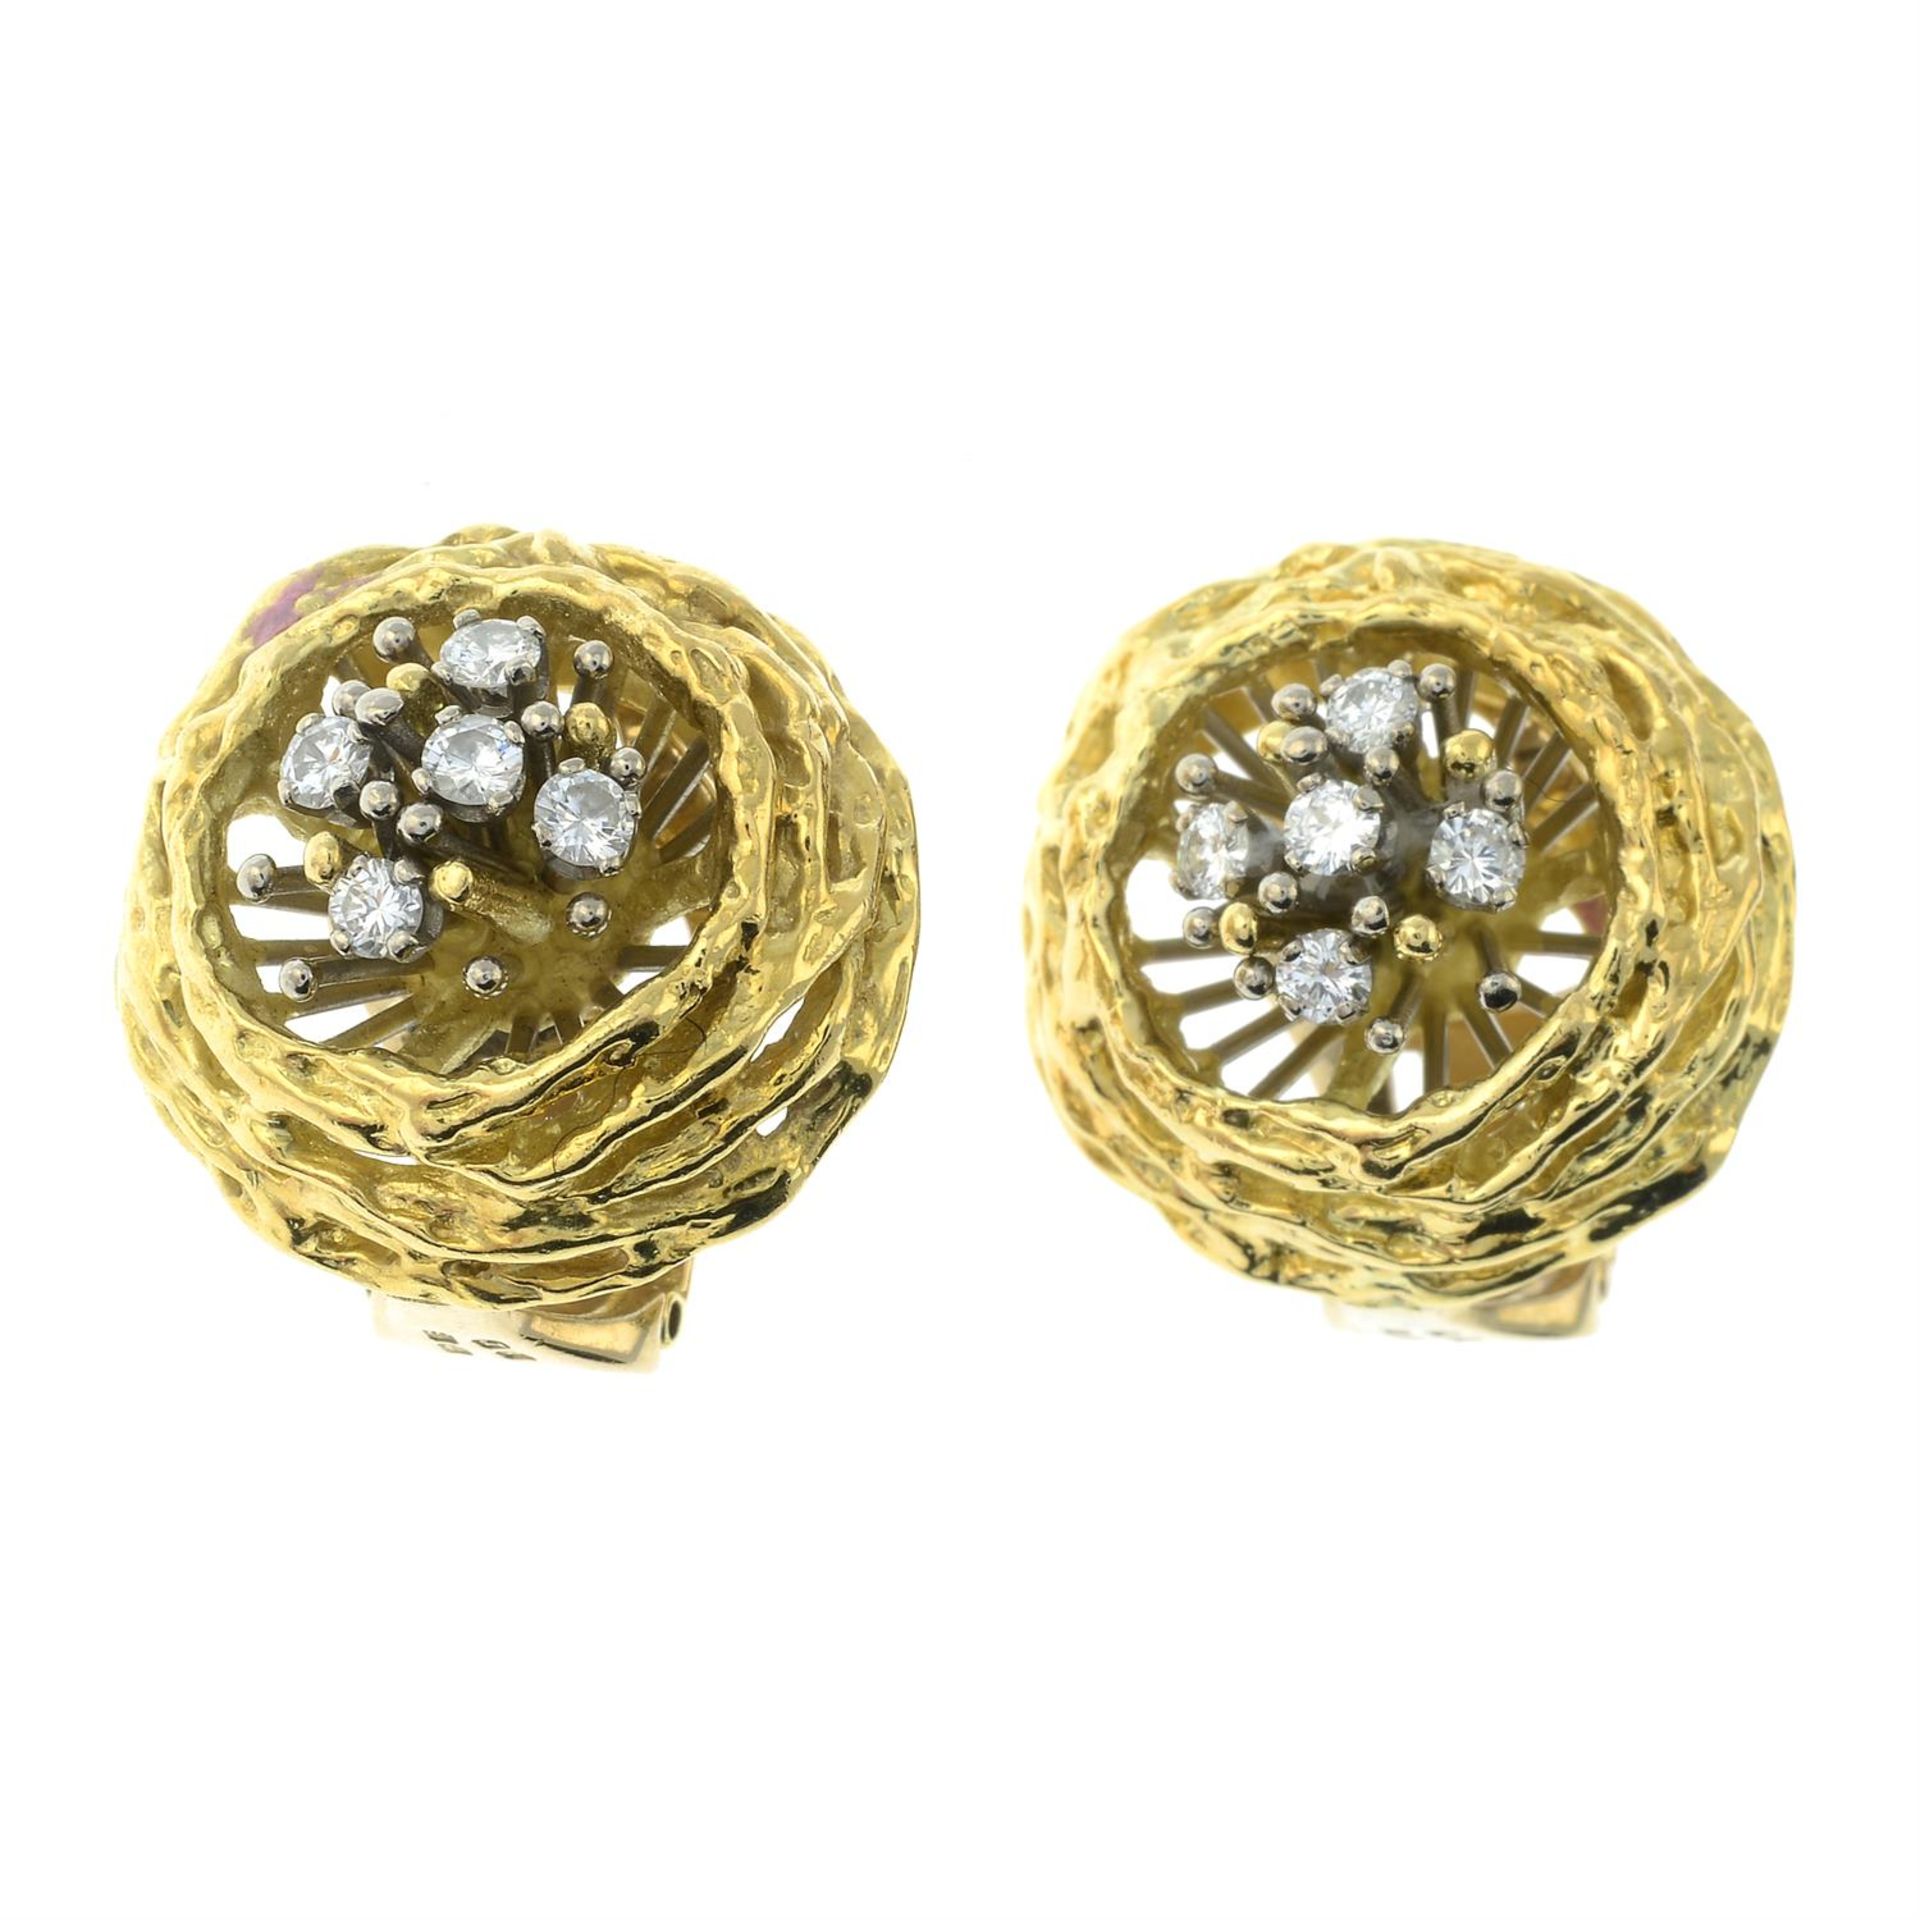 A pair of 1970s 18ct gold diamond earrings, by David Thomas. - Image 2 of 3